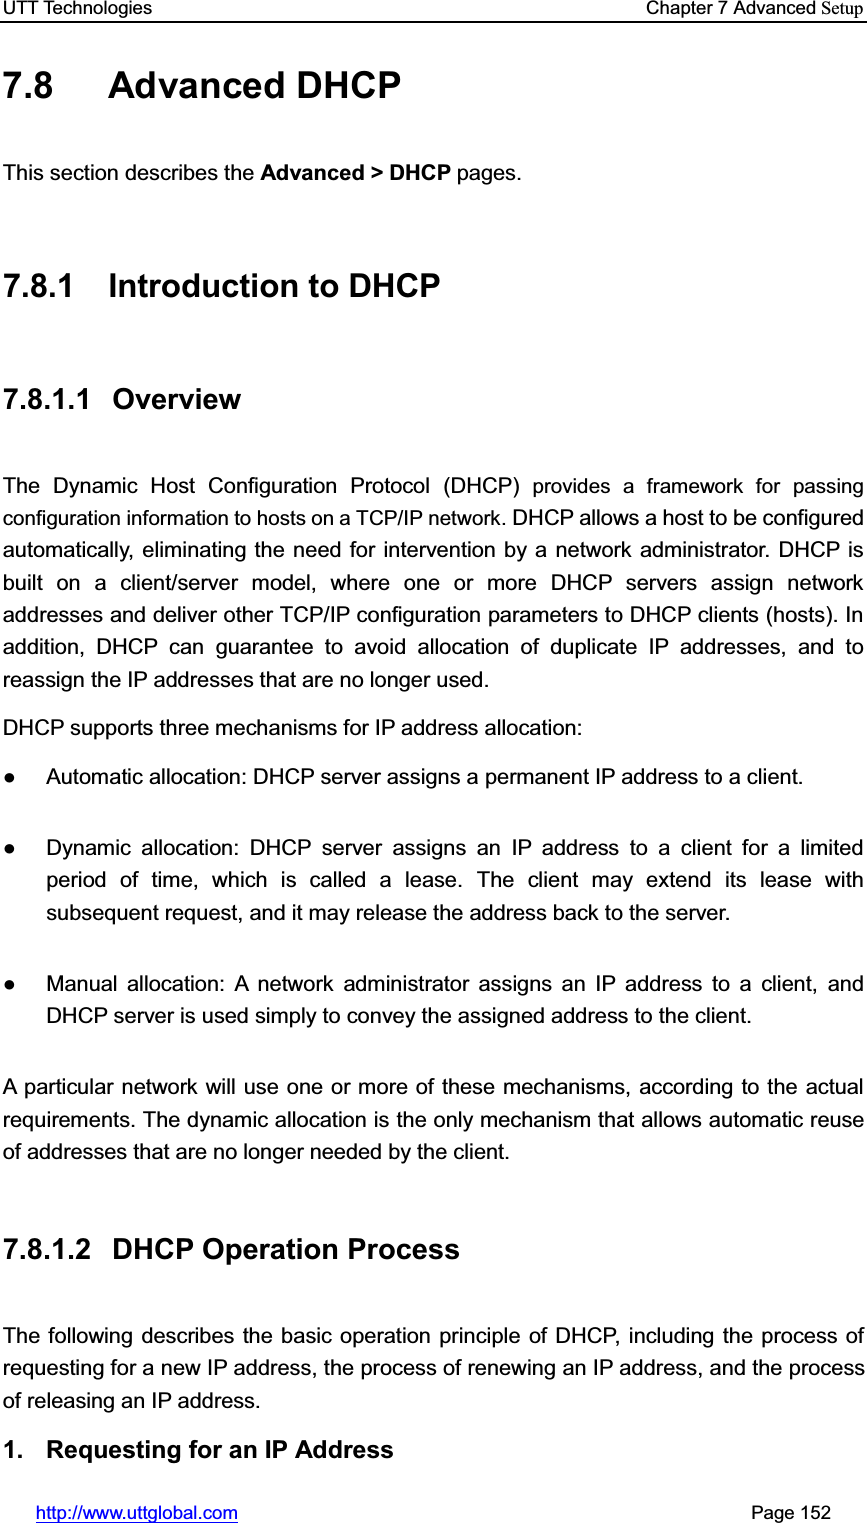 UTT Technologies    Chapter 7 Advanced Setuphttp://www.uttglobal.com                                                       Page 152 7.8 Advanced DHCP This section describes the Advanced &gt; DHCP pages.  7.8.1 Introduction to DHCP 7.8.1.1 Overview The Dynamic Host Configuration Protocol (DHCP) provides a framework for passing configuration information to hosts on a TCP/IP network. DHCP allows a host to be configured automatically, eliminating the need for intervention by a network administrator. DHCP is built on a client/server model, where one or more DHCP servers assign network addresses and deliver other TCP/IP configuration parameters to DHCP clients (hosts). In addition, DHCP can guarantee to avoid allocation of duplicate IP addresses, and to reassign the IP addresses that are no longer used. DHCP supports three mechanisms for IP address allocation: Ɣ  Automatic allocation: DHCP server assigns a permanent IP address to a client. Ɣ  Dynamic allocation: DHCP server assigns an IP address to a client for a limited period of time, which is called a lease. The client may extend its lease with subsequent request, and it may release the address back to the server.   Ɣ  Manual allocation: A network administrator assigns an IP address to a client, and DHCP server is used simply to convey the assigned address to the client. A particular network will use one or more of these mechanisms, according to the actual requirements. The dynamic allocation is the only mechanism that allows automatic reuse of addresses that are no longer needed by the client.   7.8.1.2  DHCP Operation Process The following describes the basic operation principle of DHCP, including the process of requesting for a new IP address, the process of renewing an IP address, and the process of releasing an IP address. 1.  Requesting for an IP Address 